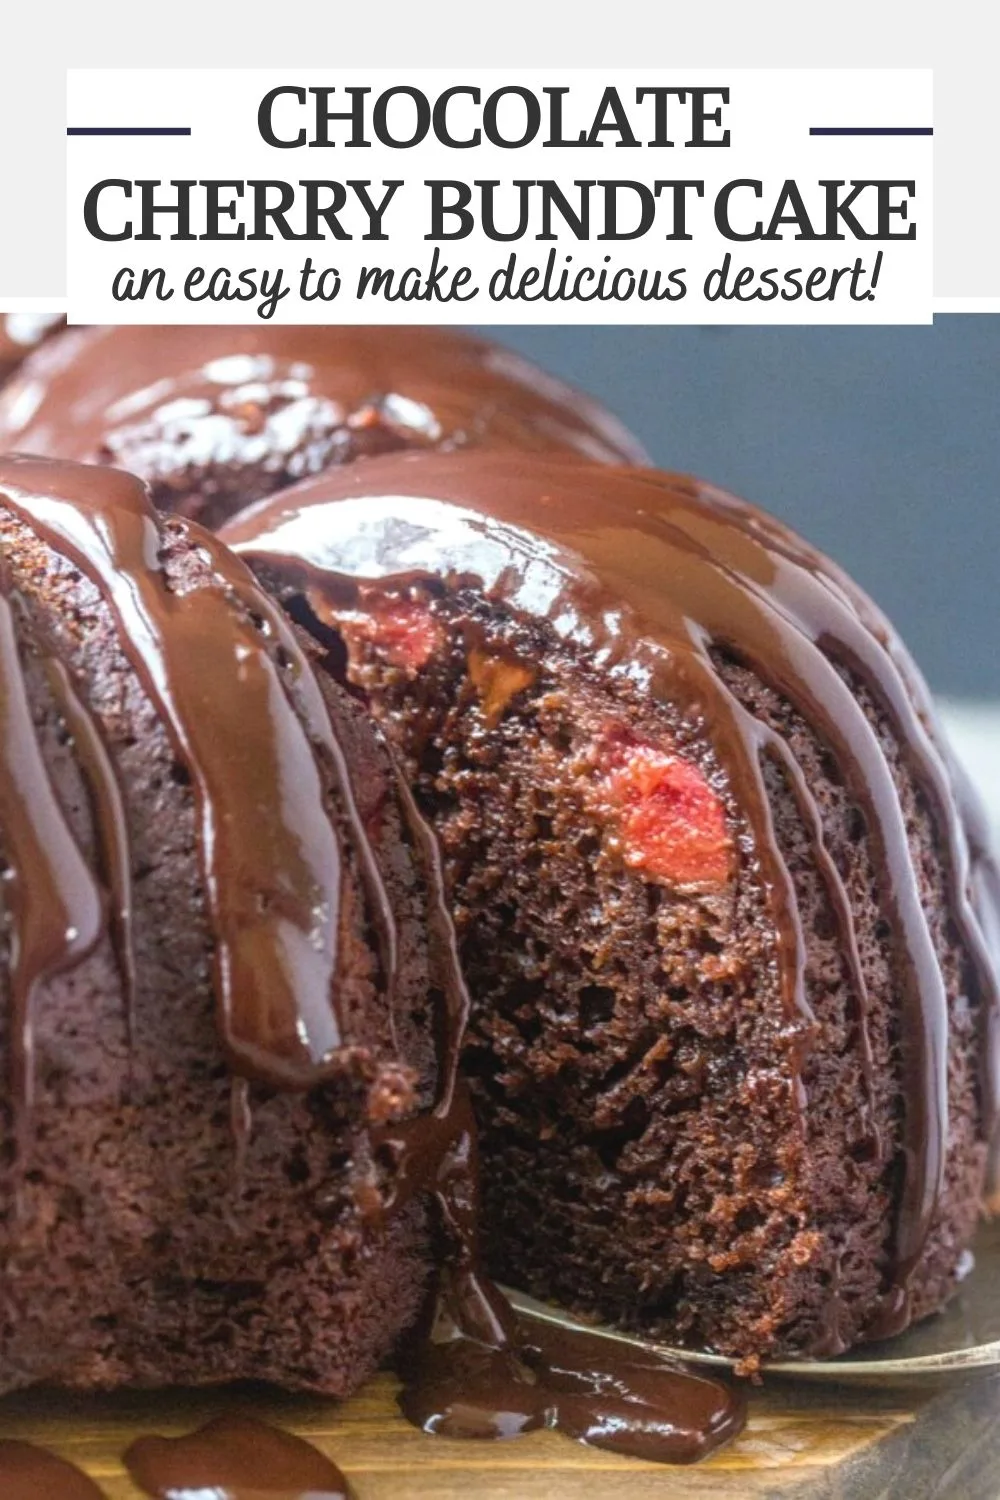 This fun chocolate and cherry filled bundt cake comes together in a snap and is so much fun to serve and eat. It was one of the recipes that my mom had loaded and ready in the recipe box she gave me and it is a family favorite!